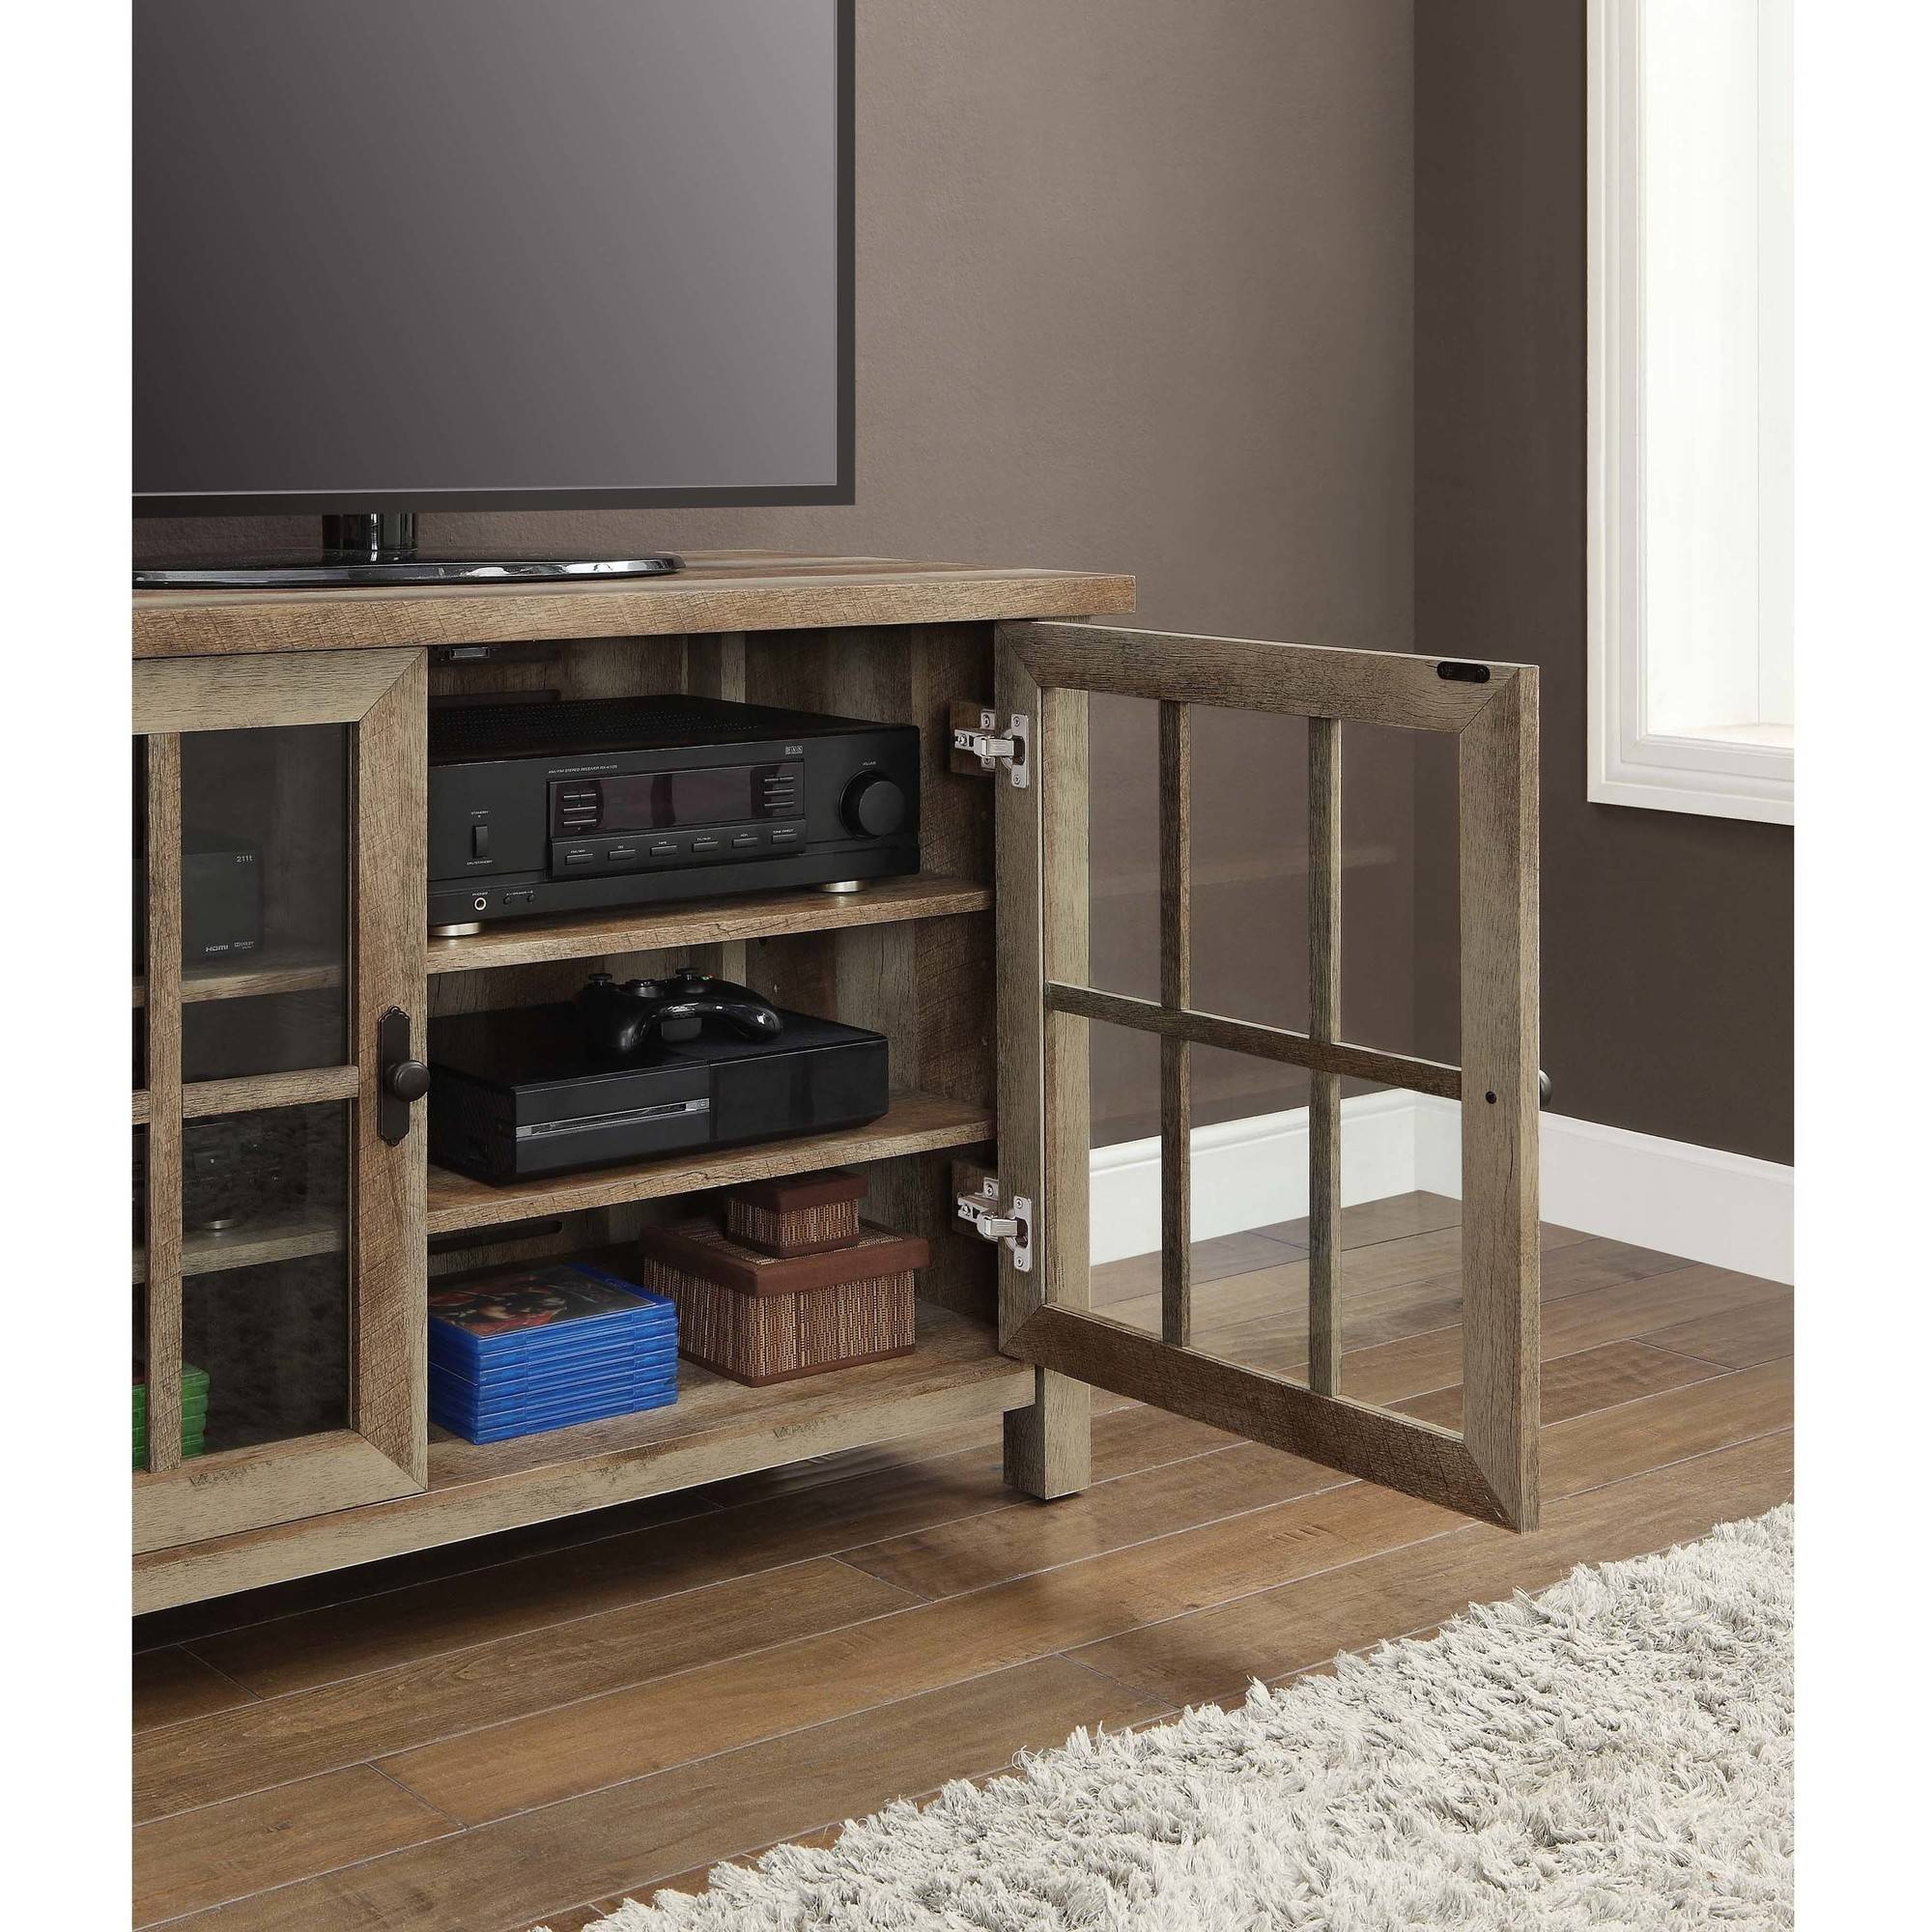 Better Homes & Gardens Oxford Square TV Stand for TVs up to 55", Rustic Brown - image 2 of 12